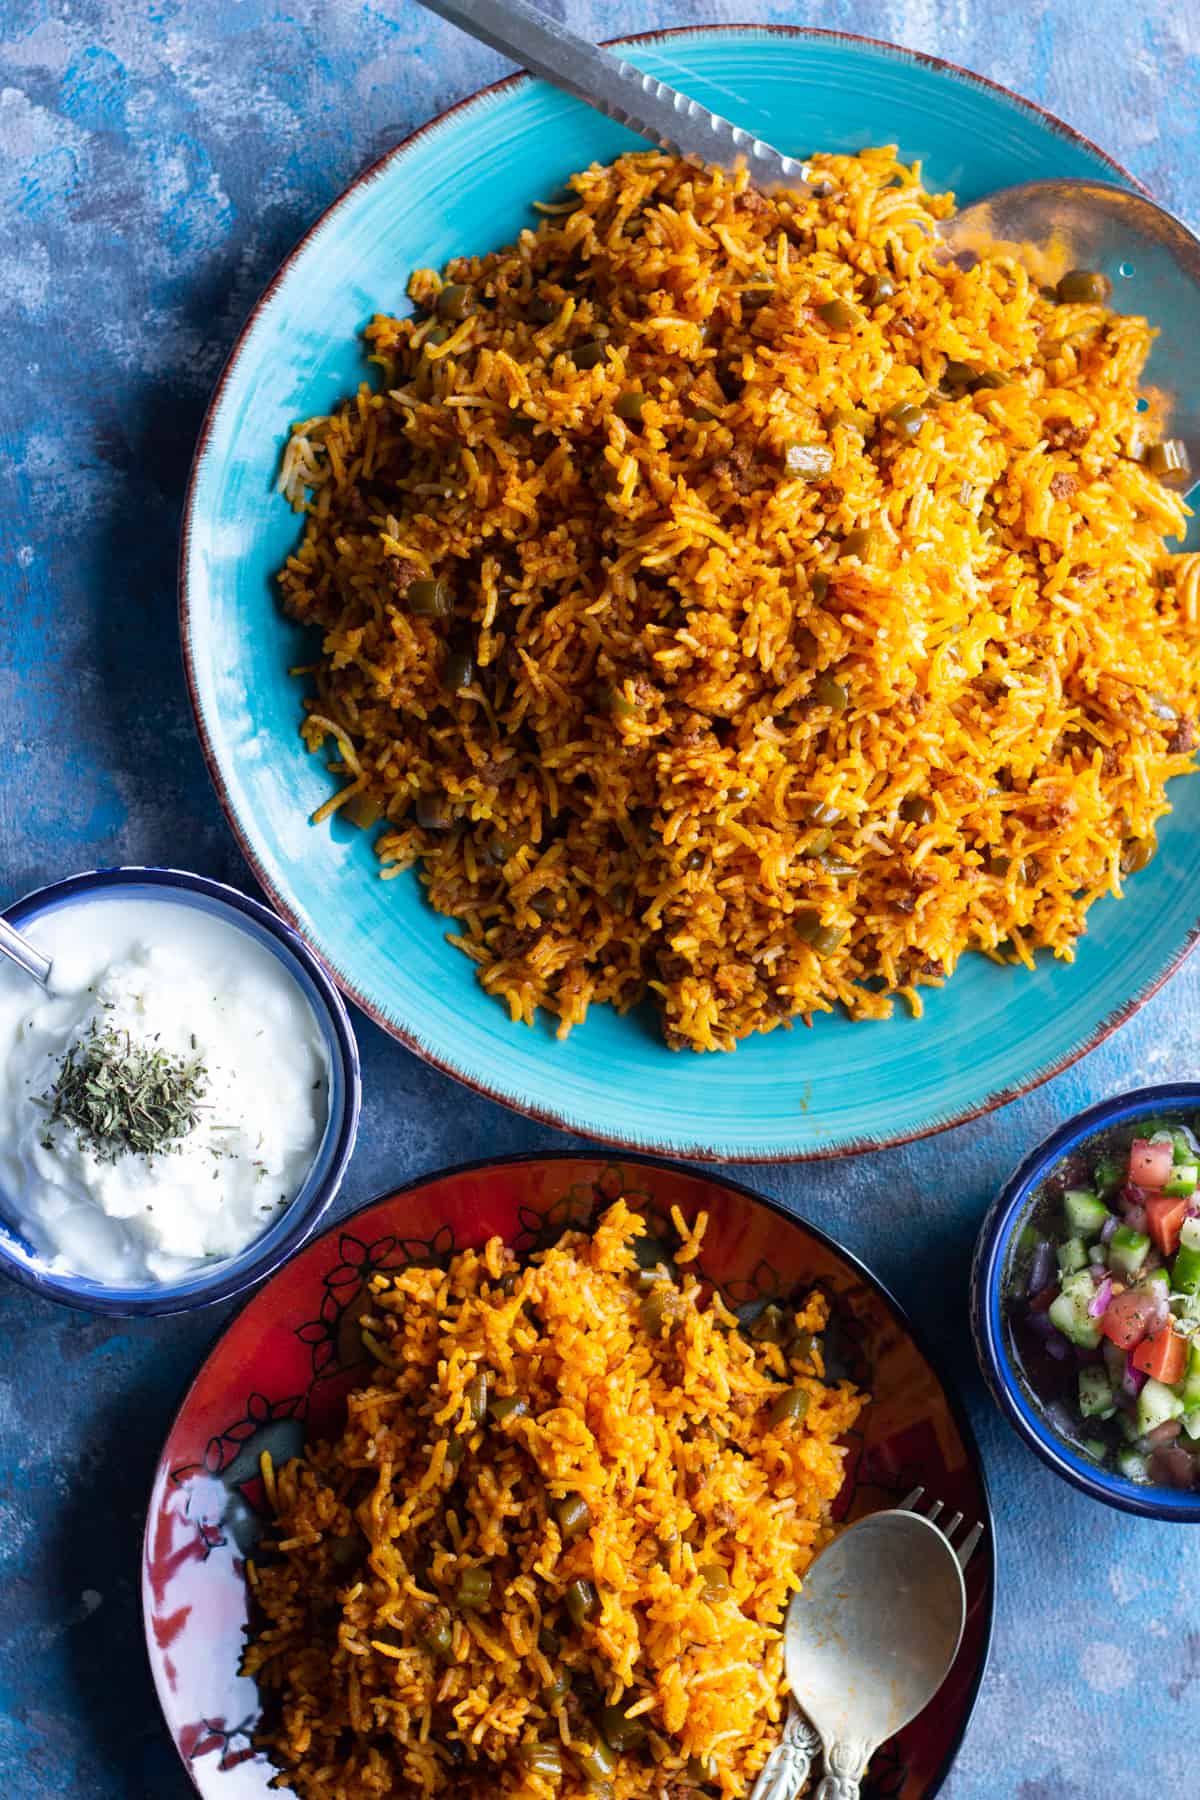 Lubia polo is a classic Persian green bean rice recipe that's flavored with warm and aromatic spices. Follow along to learn how to make this tasty recipe using my step-by-step recipe and tips.
